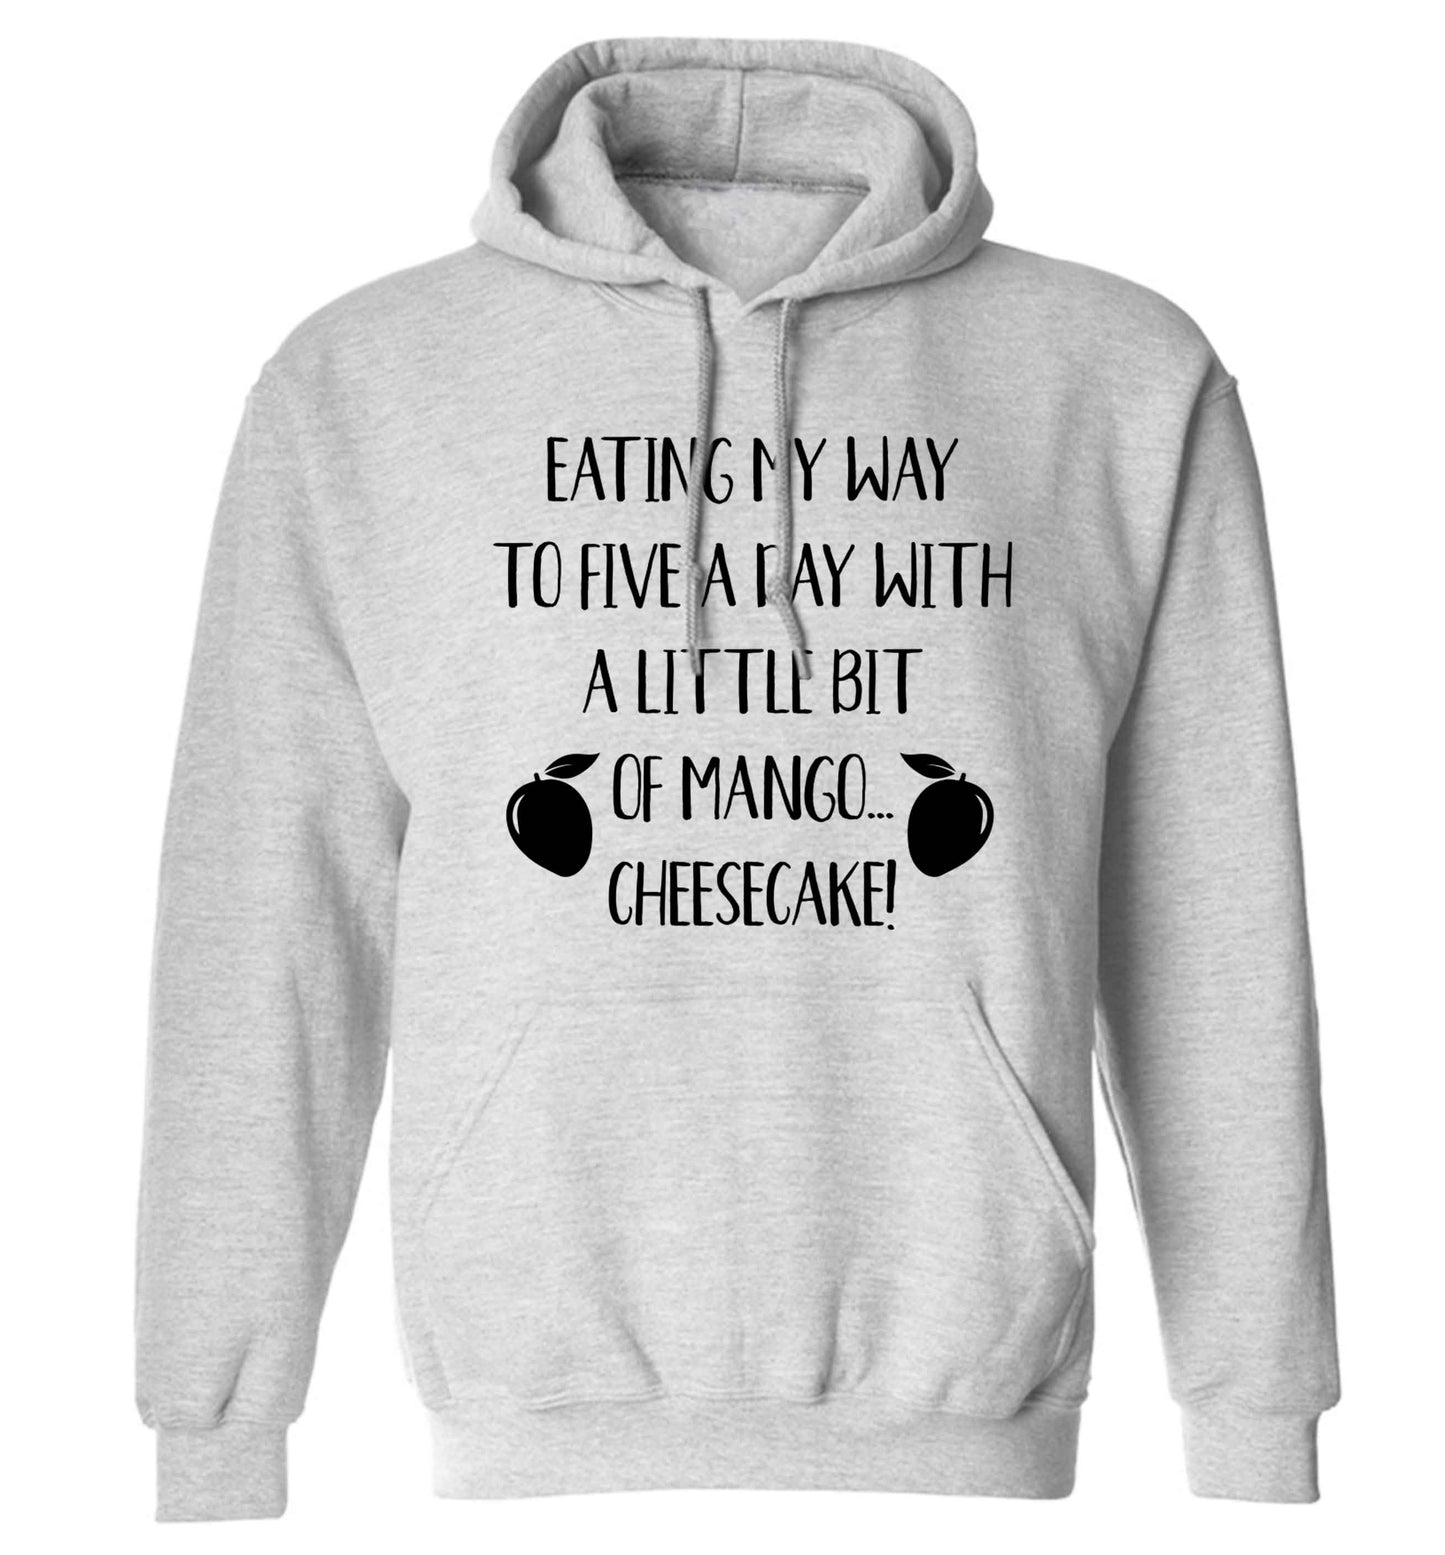 Eating my way to five a day with a little bit of mango cheesecake adults unisex grey hoodie 2XL